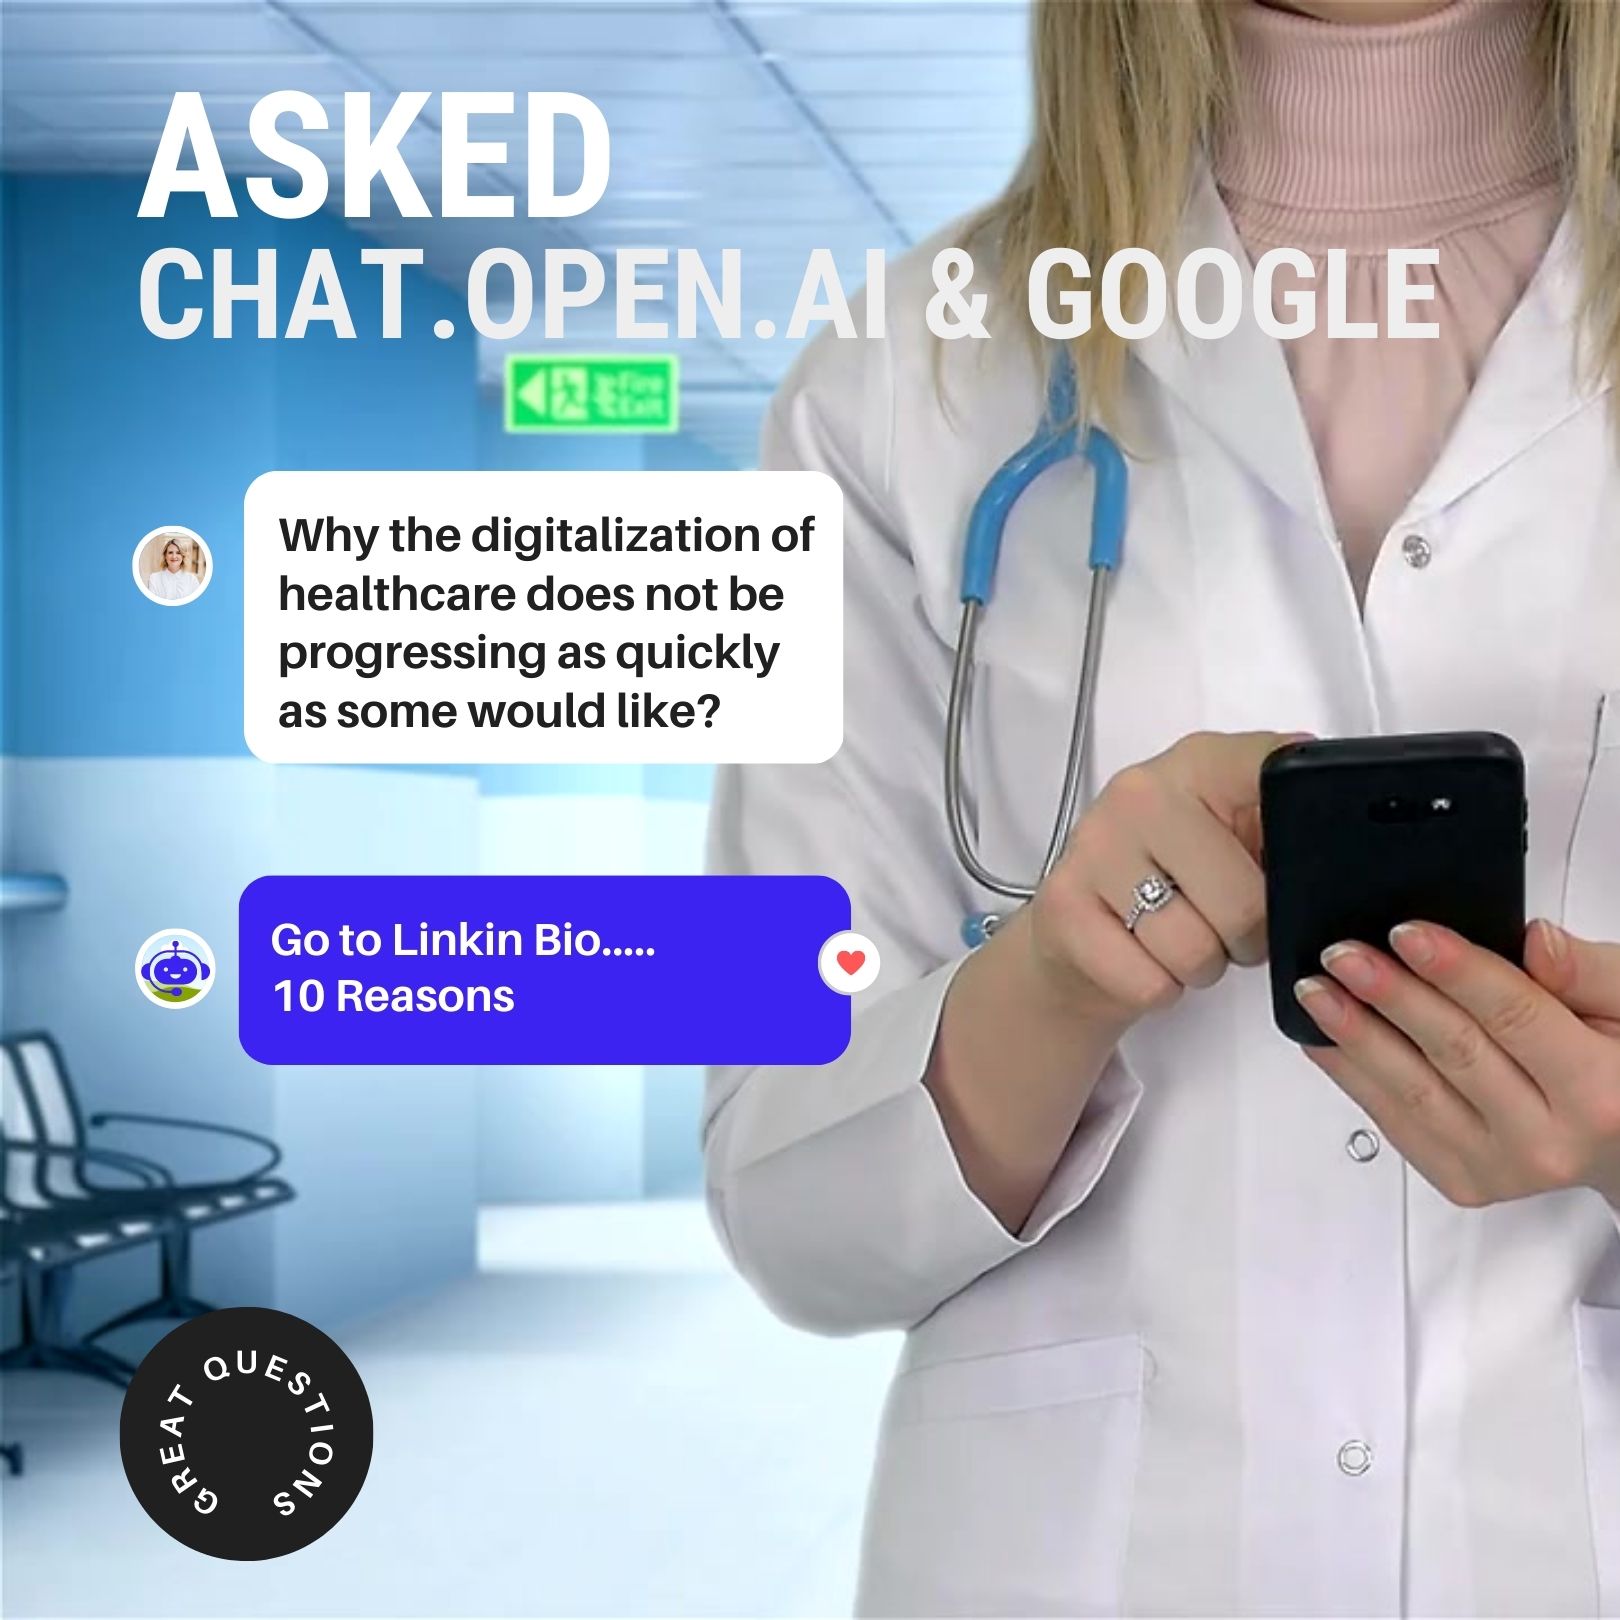 We ask GOOGLE, CHATGPT and Doctors: Why the digitalization of healthcare may not be progressing as quickly as some would like?